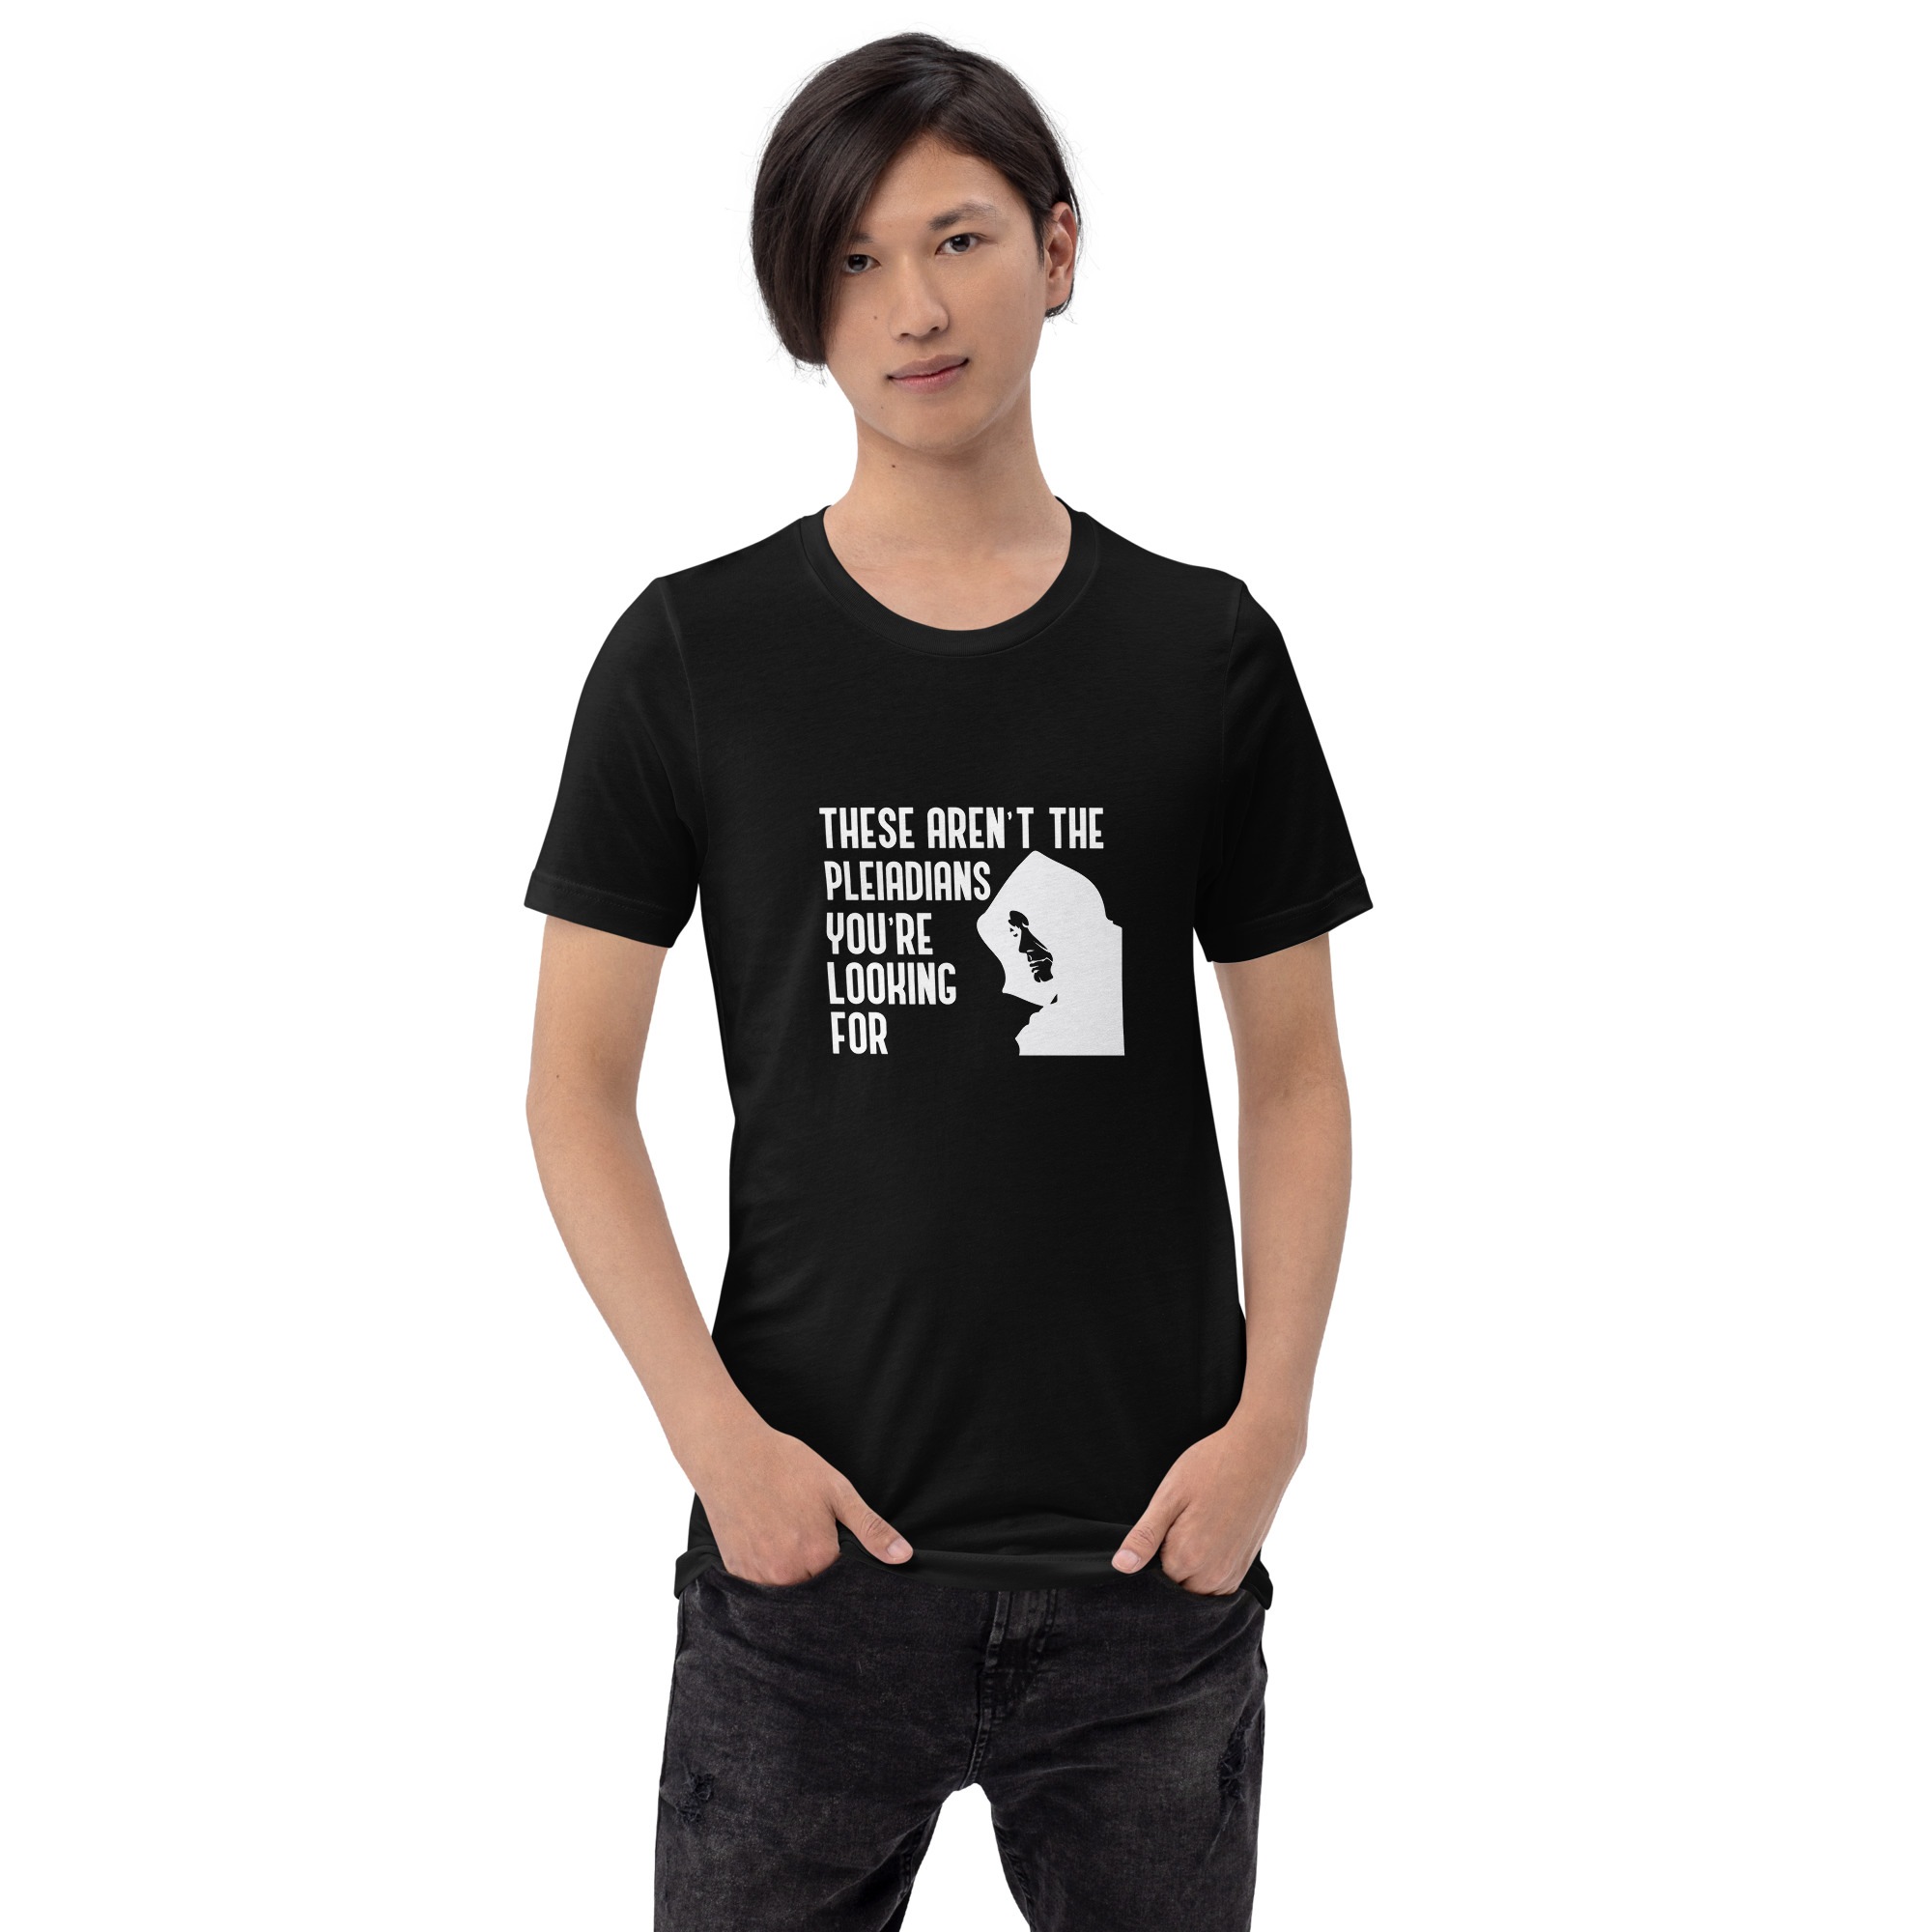 These Aren't the Pleiadians You're Looking For Tshirt